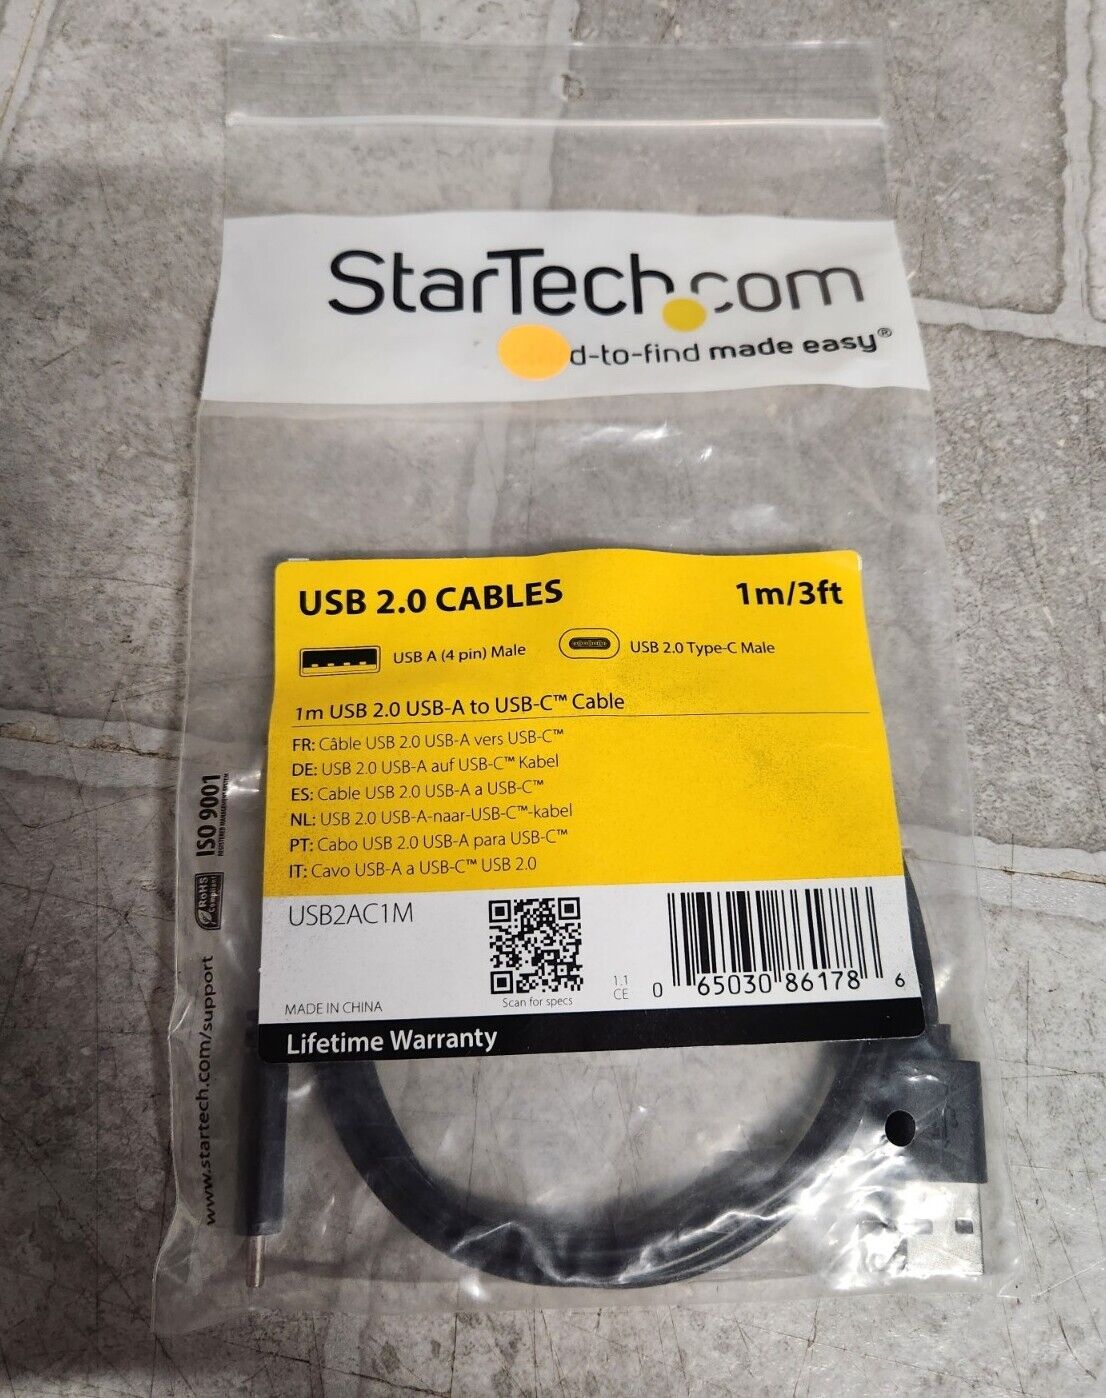 NEW StarTech USB 2.0 Cables 1m/3ft